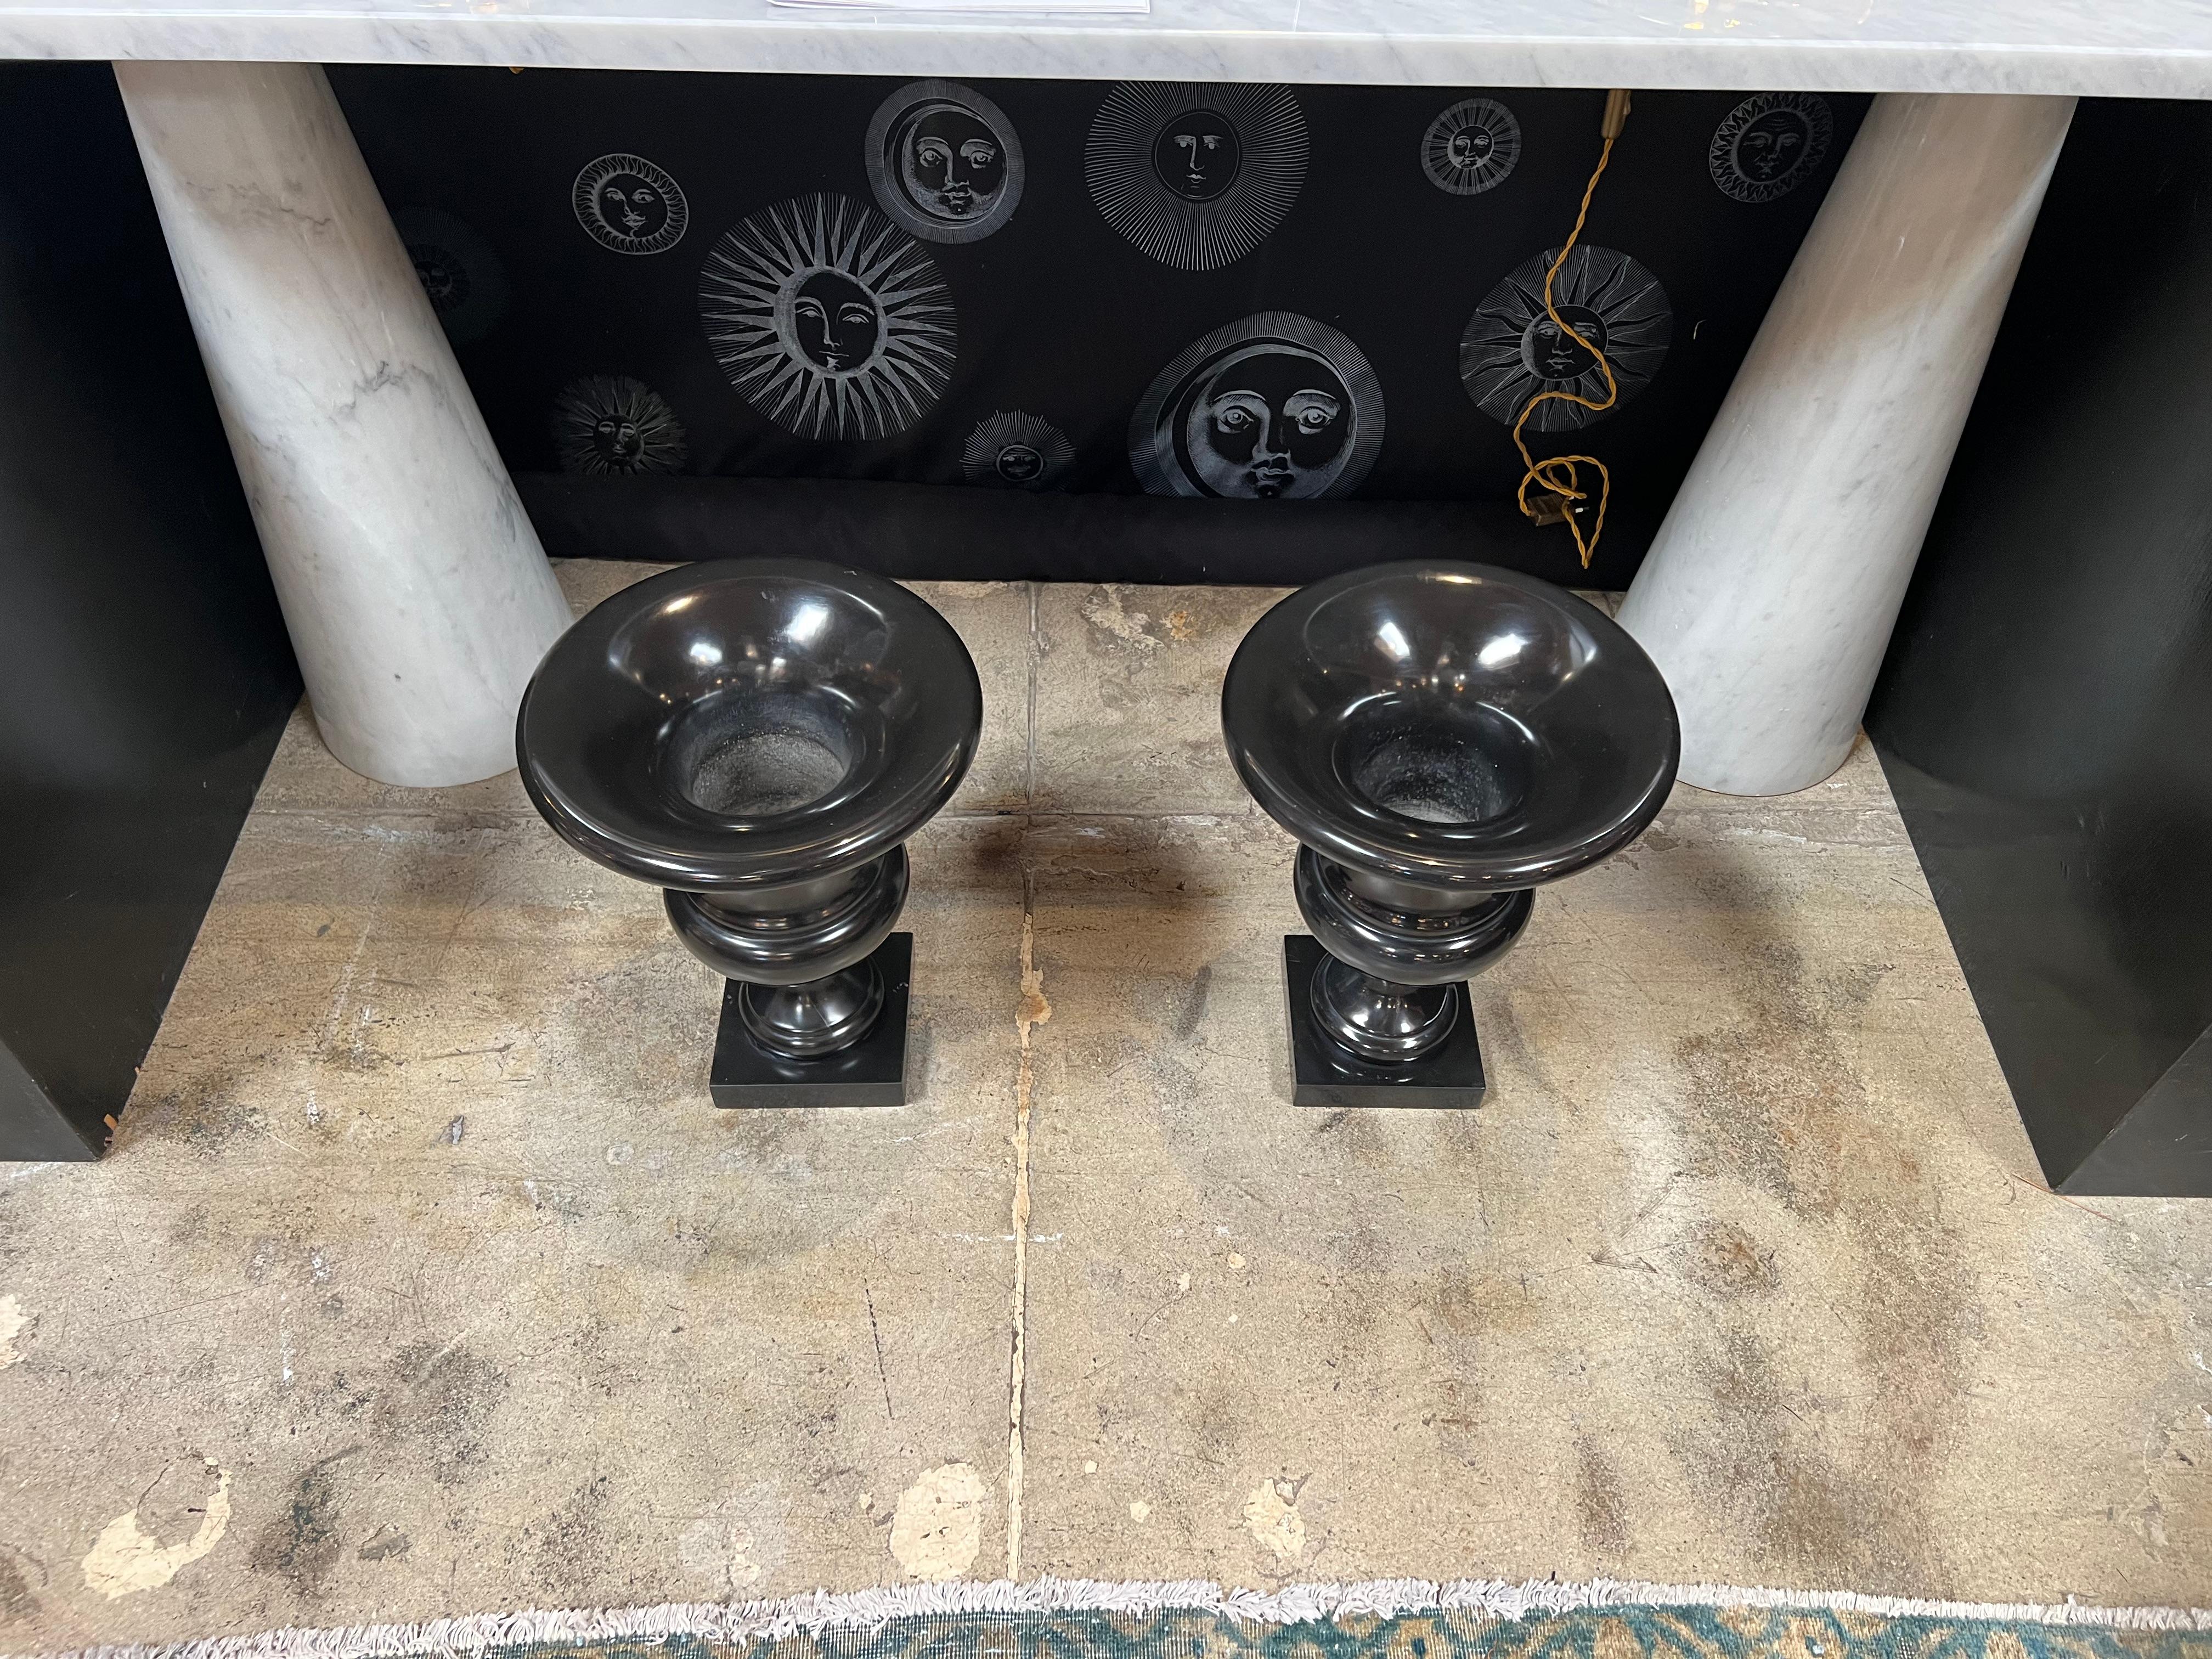 The Pair of 2 Italian Decorative Black Vases from the 1960s is a set of elegant vases with a sleek black finish, originating from Italy. These vases showcase the artistic flair of the era, combining form and function to enhance interior spaces with